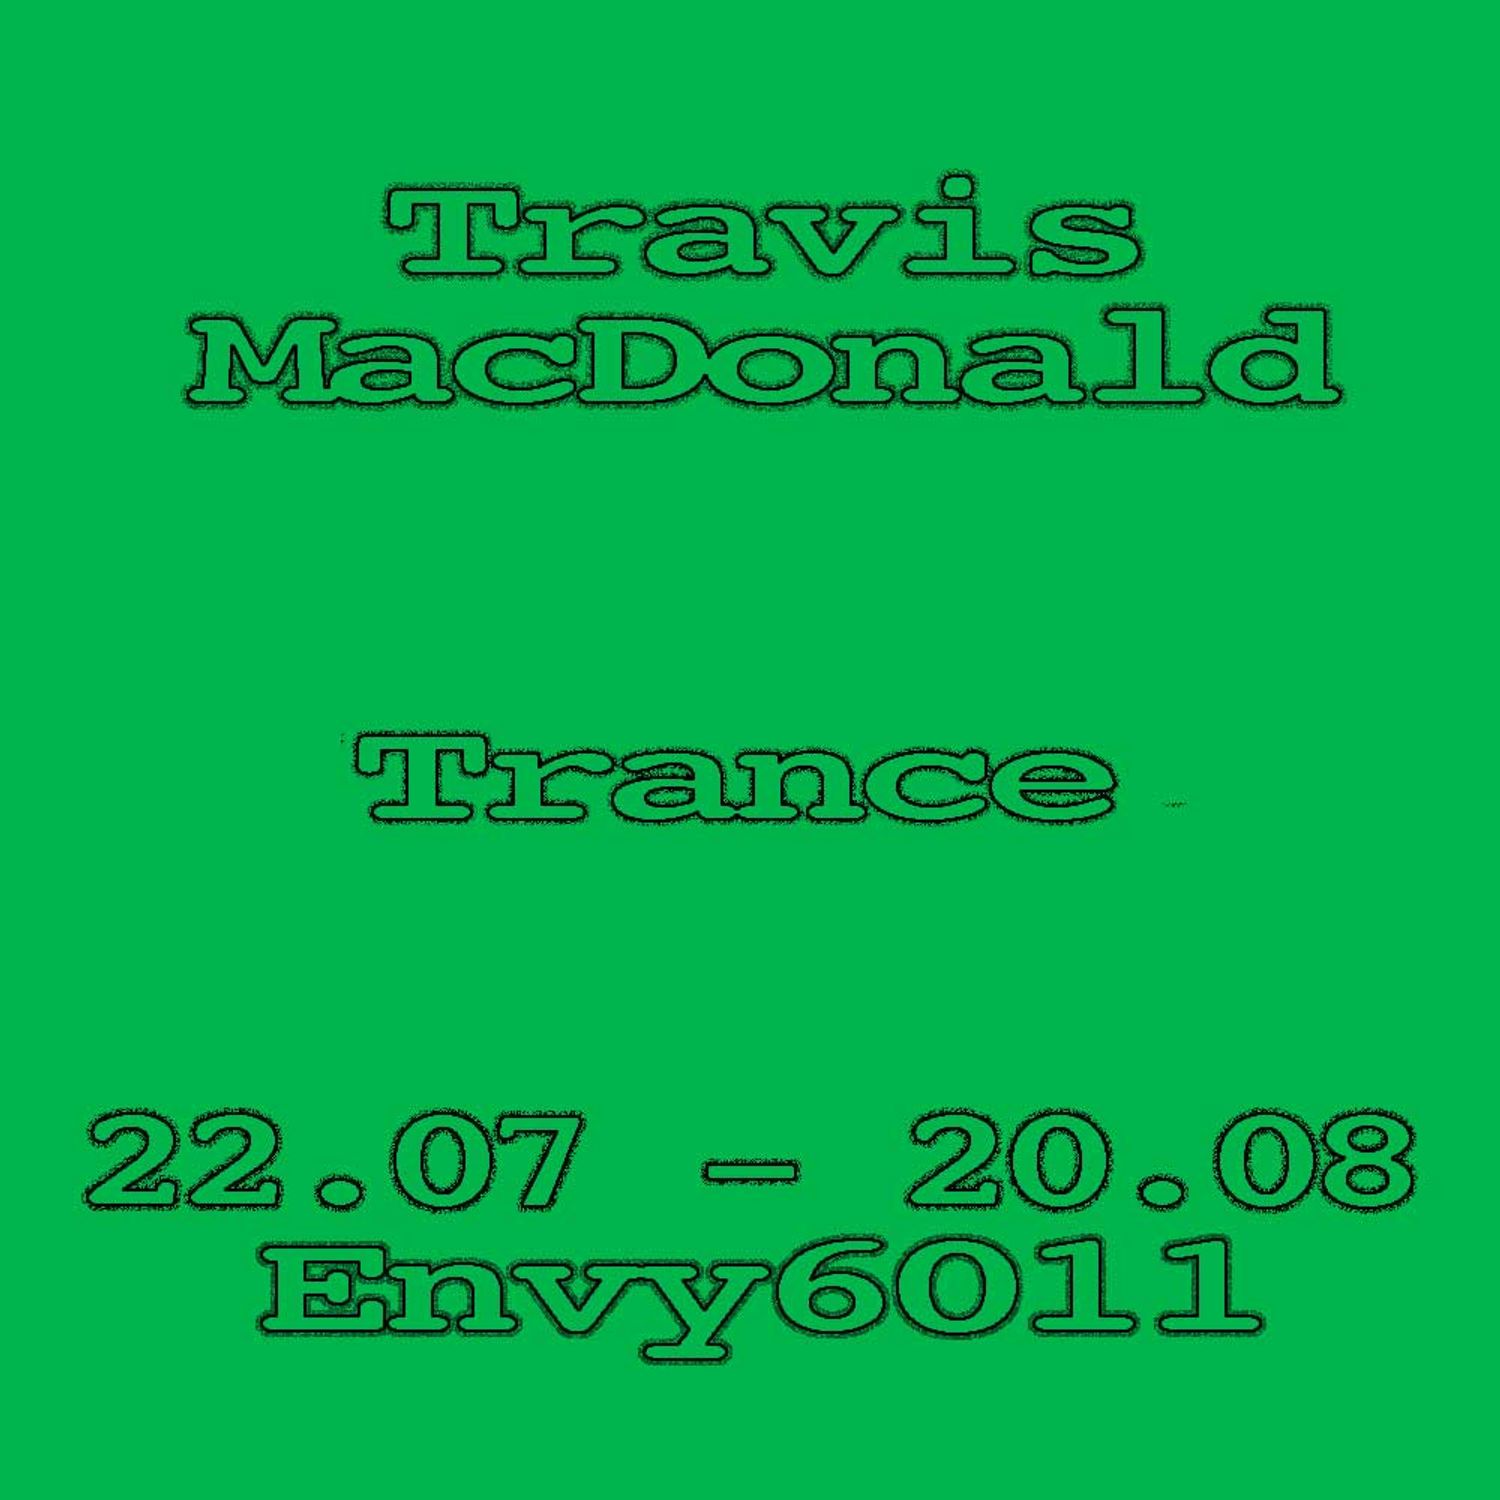 Envy6011 is proud to present new works by Travis MacDonald, notably his first solo exhibition in New Zealand. Trance is a series of paintings on altered canvases drawing references from crafts and social dynamics within counter-culture movements.